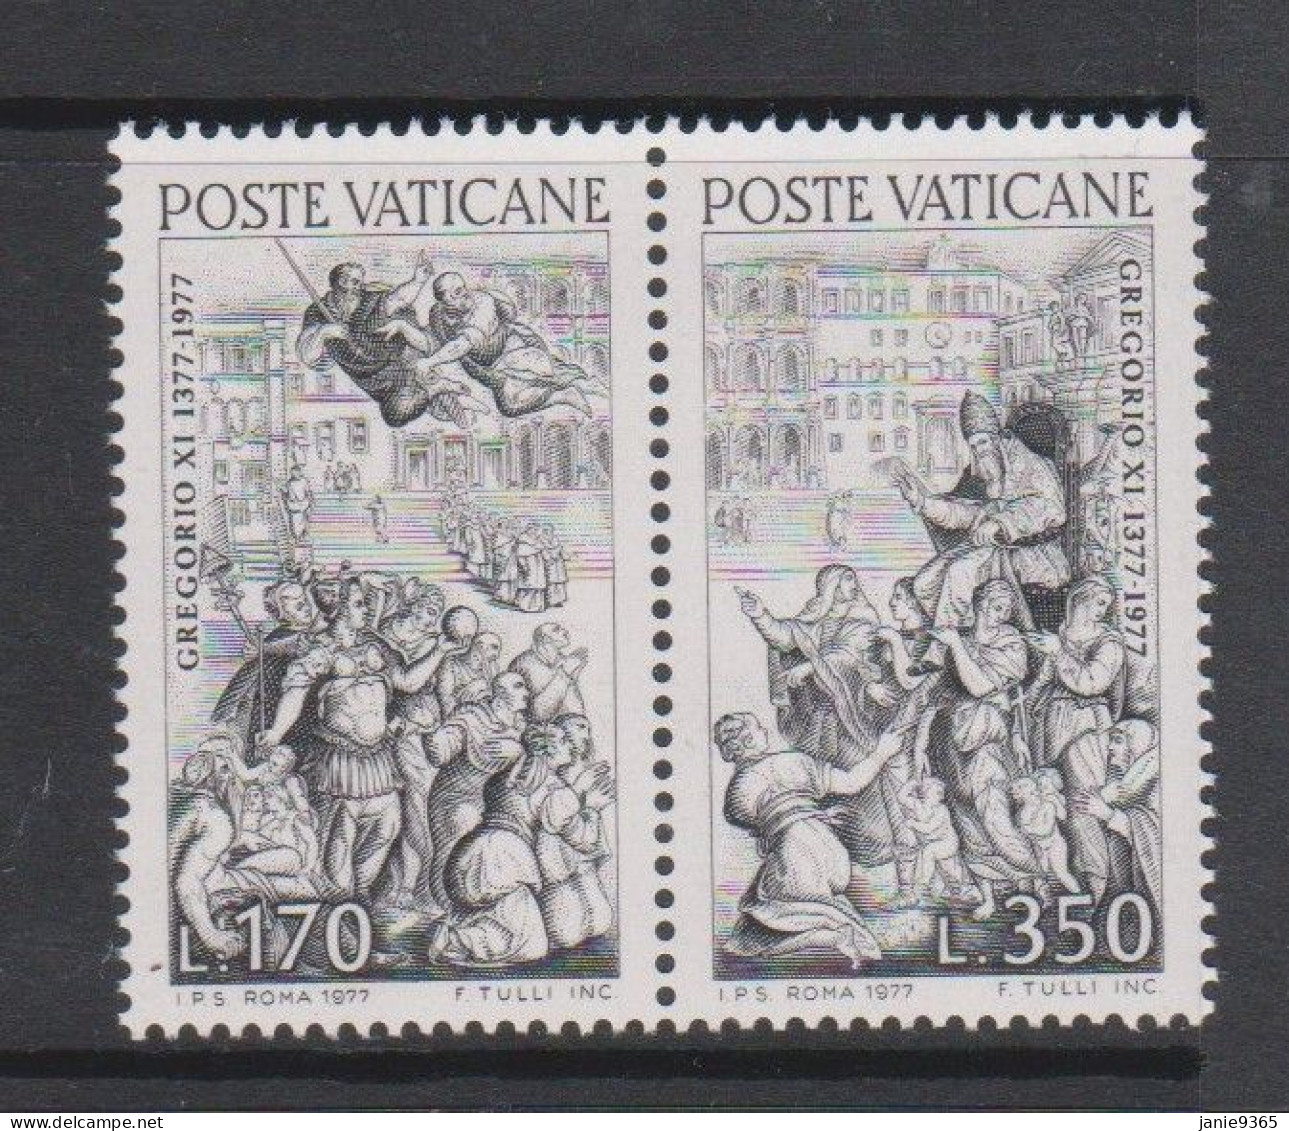 Vatican City S 629-630 1977 6th Centenary Pope Gregorio XI Return To Rome.mint Never Hinged - Unused Stamps